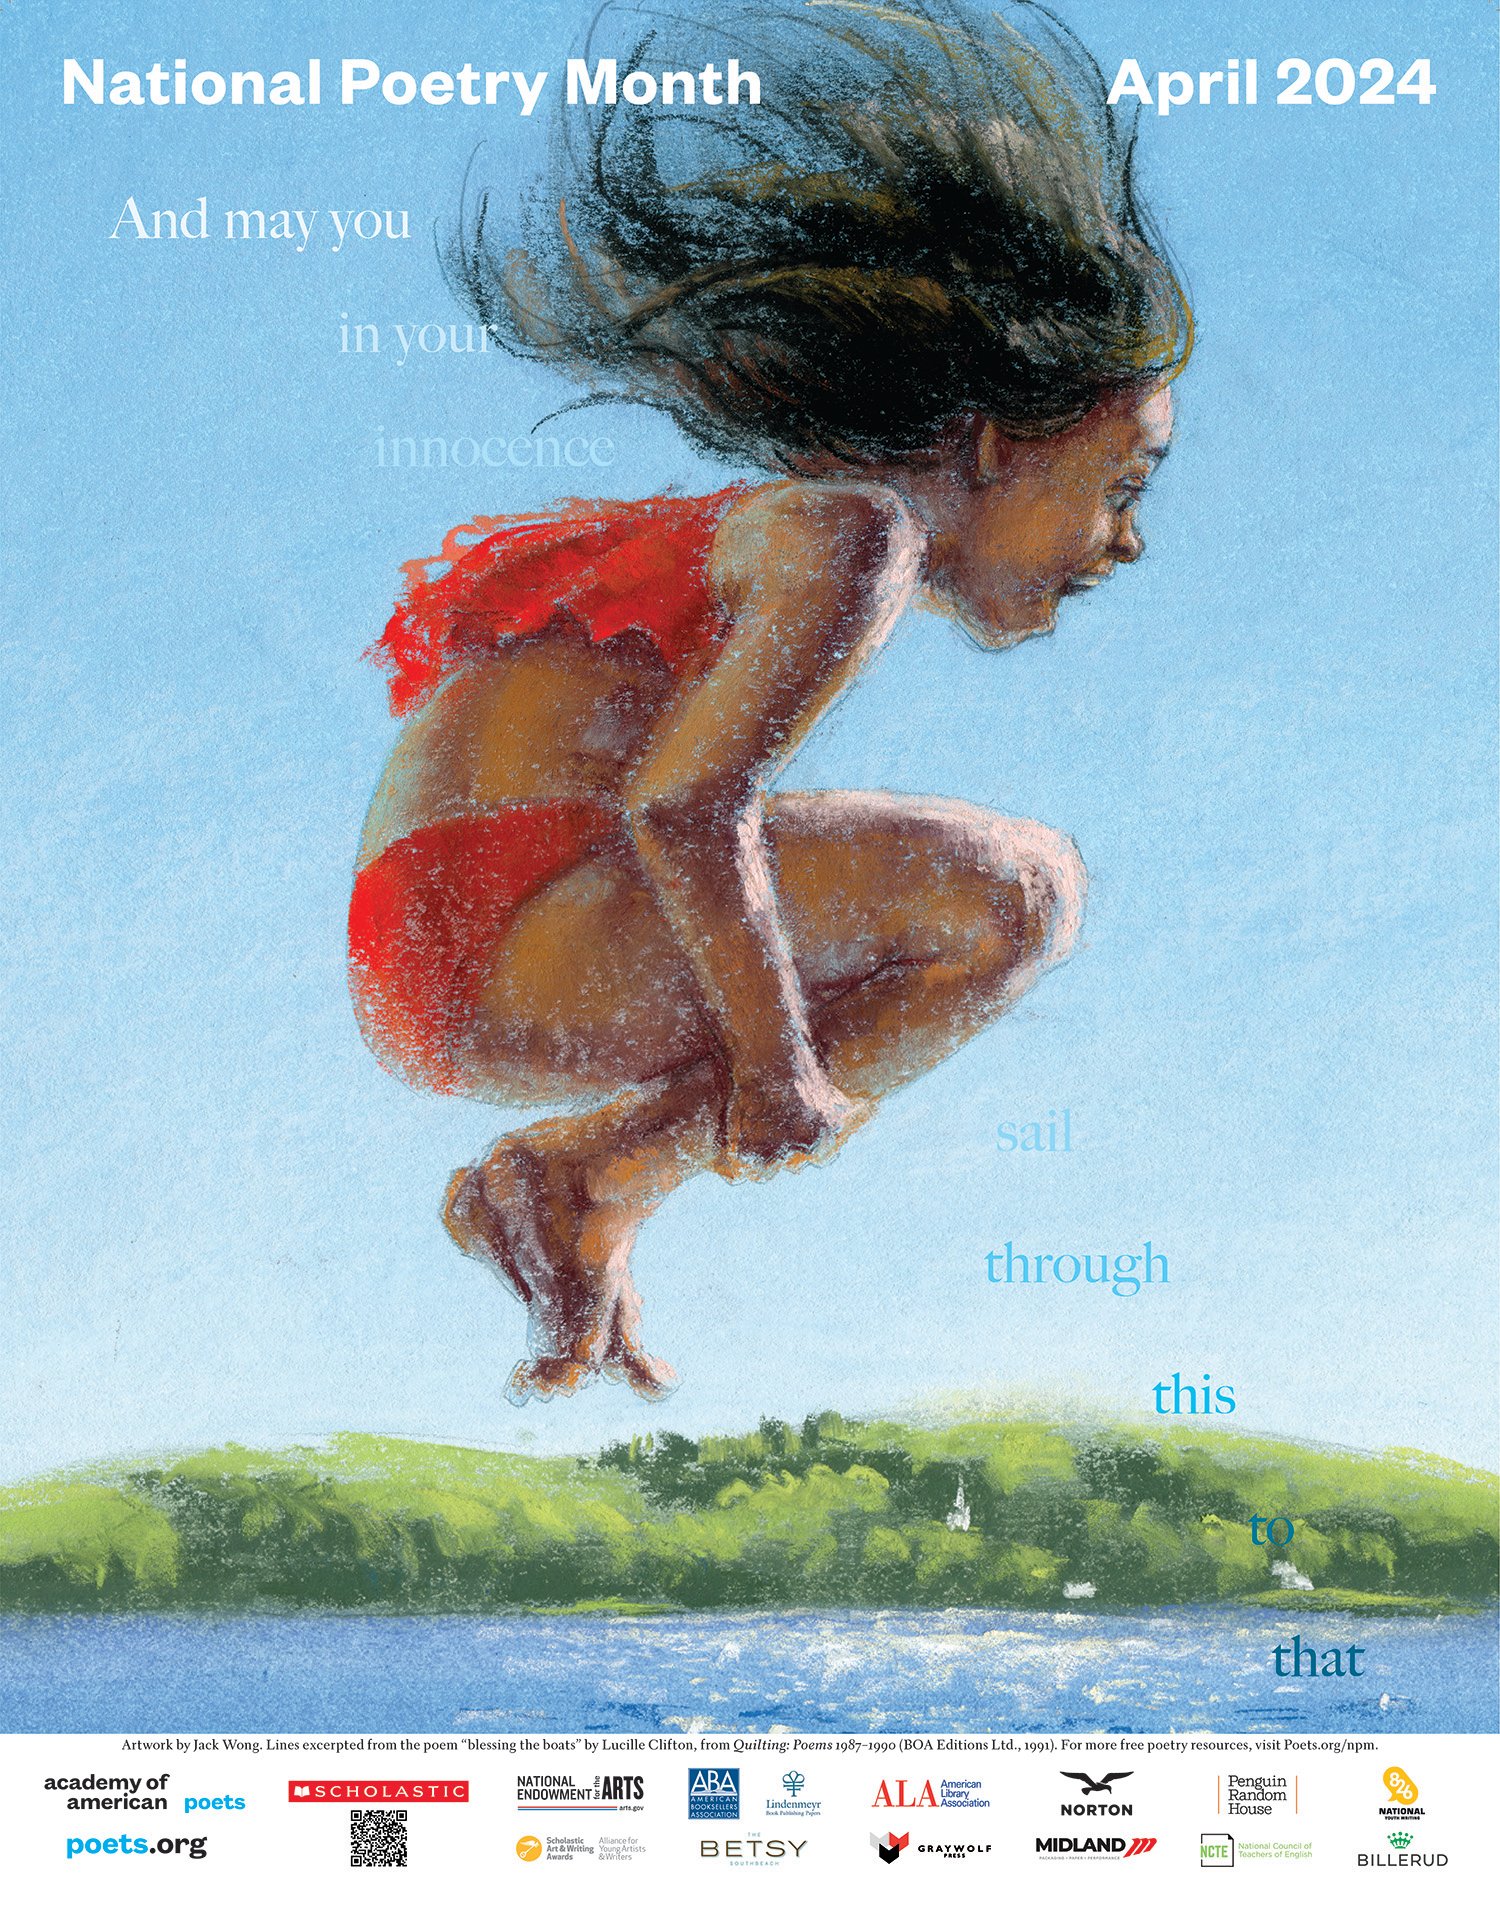 April 2024 National Poetry Month poster, featuring a chalky illustration of a brown-skinned child with long black hair and wearing a red tankini forming a cannonball with their body and jumping into a lake. The words "And may you / in your / innocence / sail / through / this / to / that" cascade diagonally across the poster. 